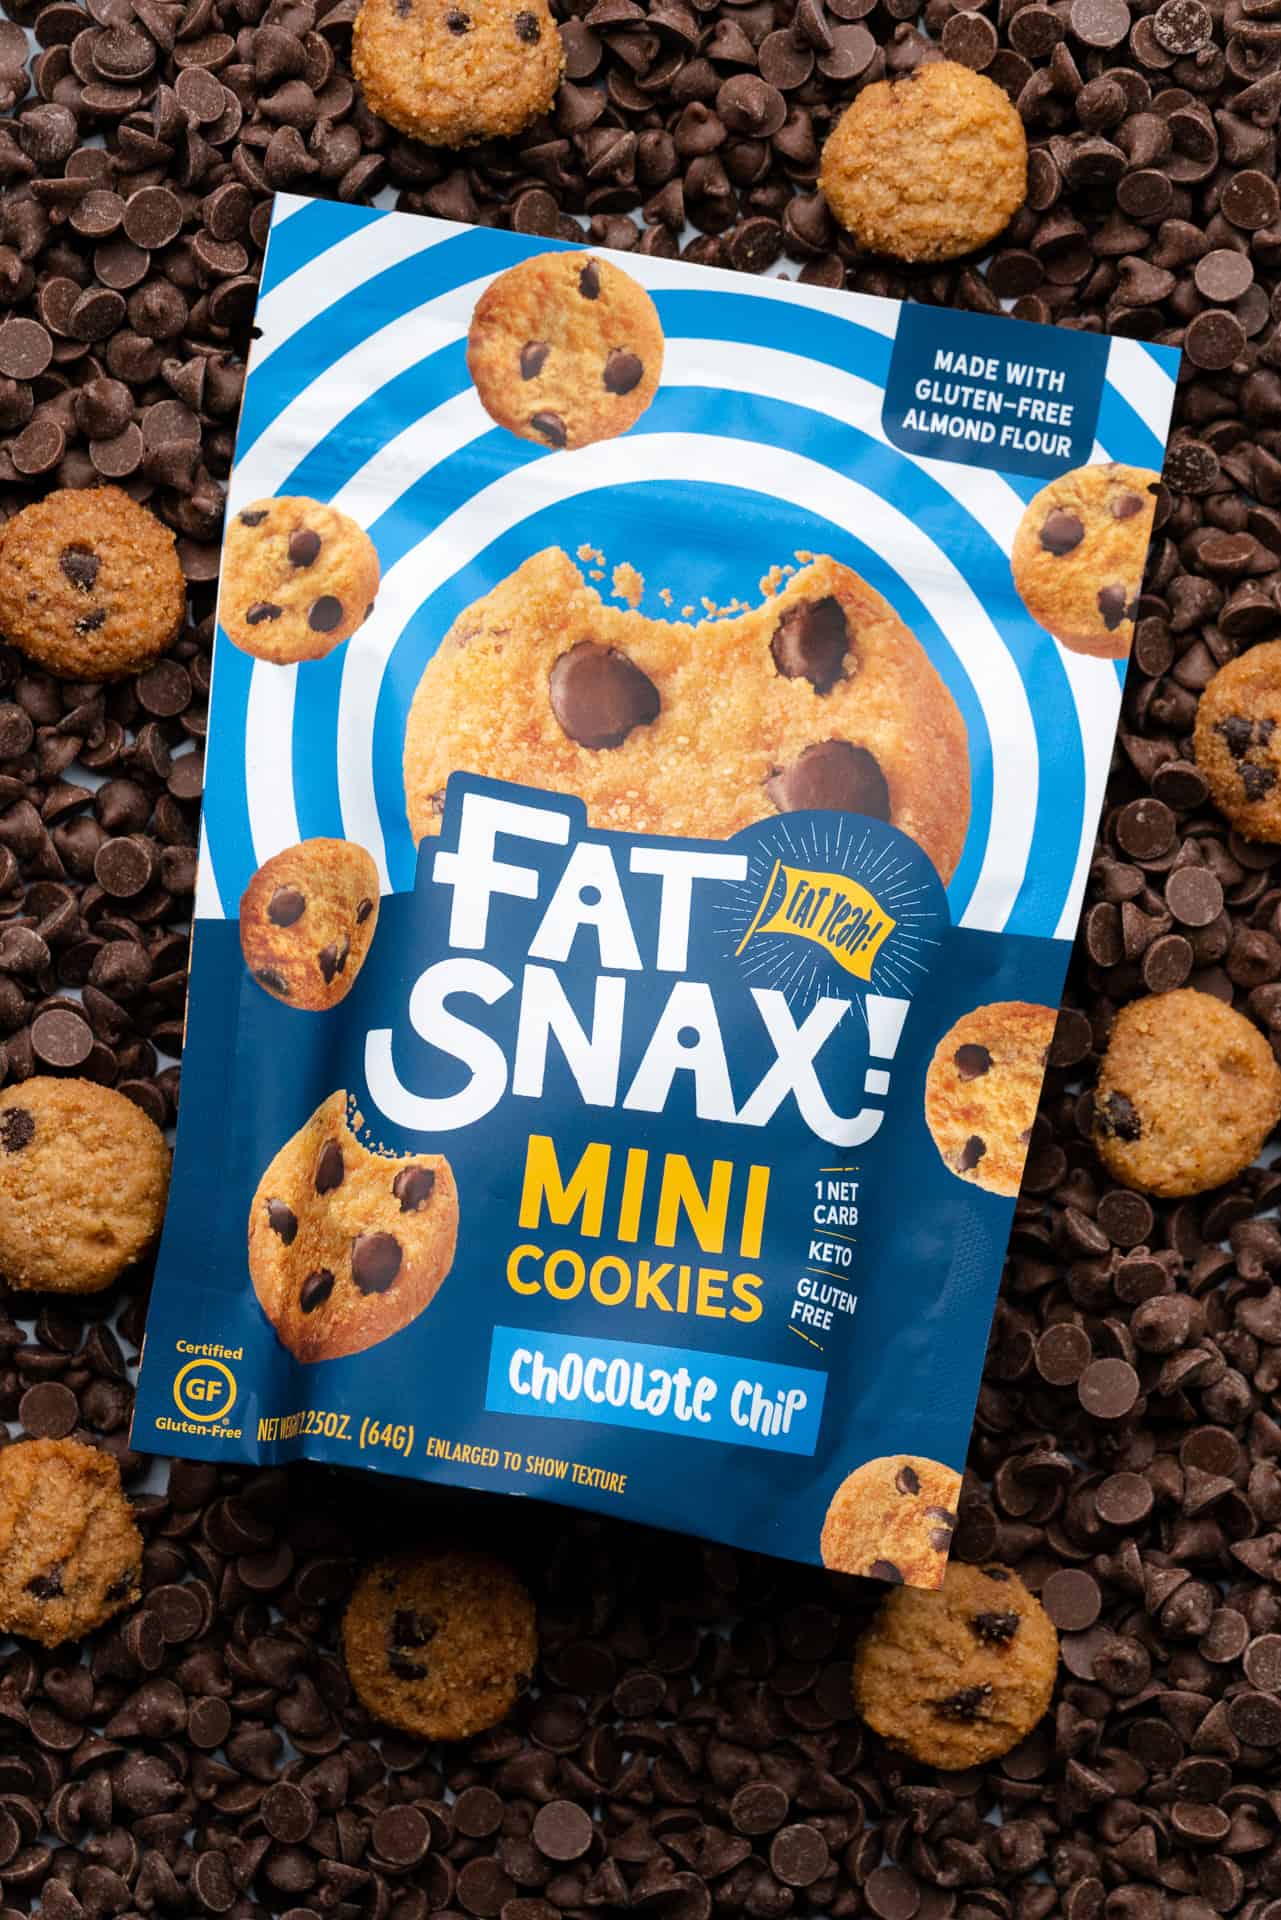 Fat Snax Mini Cookies laying on bed of chocolate chips